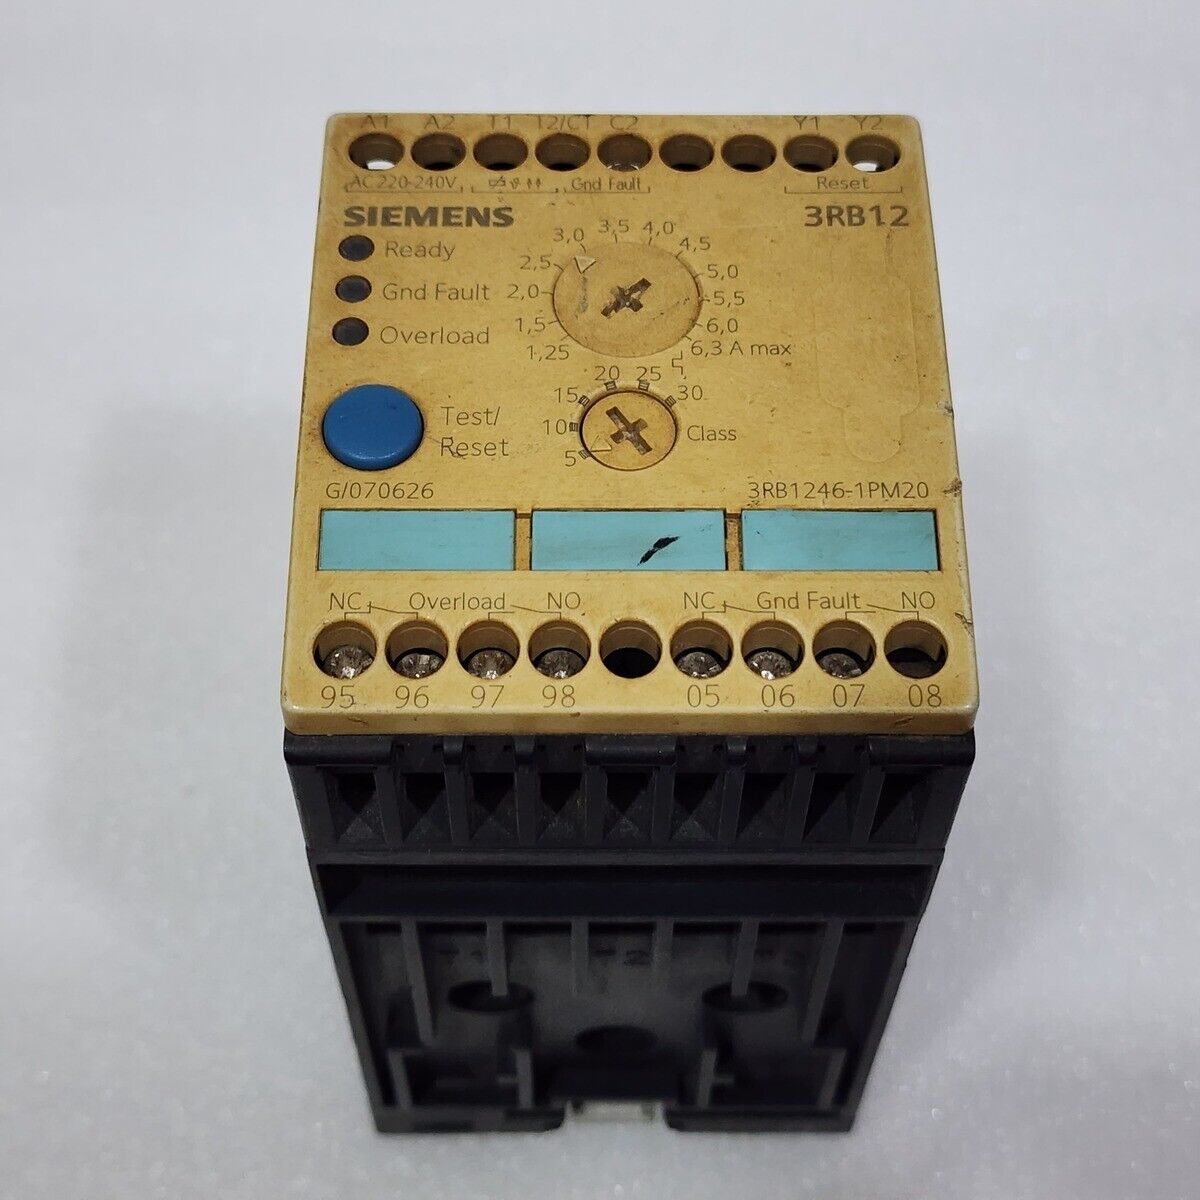 SIEMENS 3RB12 ELECTRONIC OVERLOAD RELAY 3RB1246-1PM20